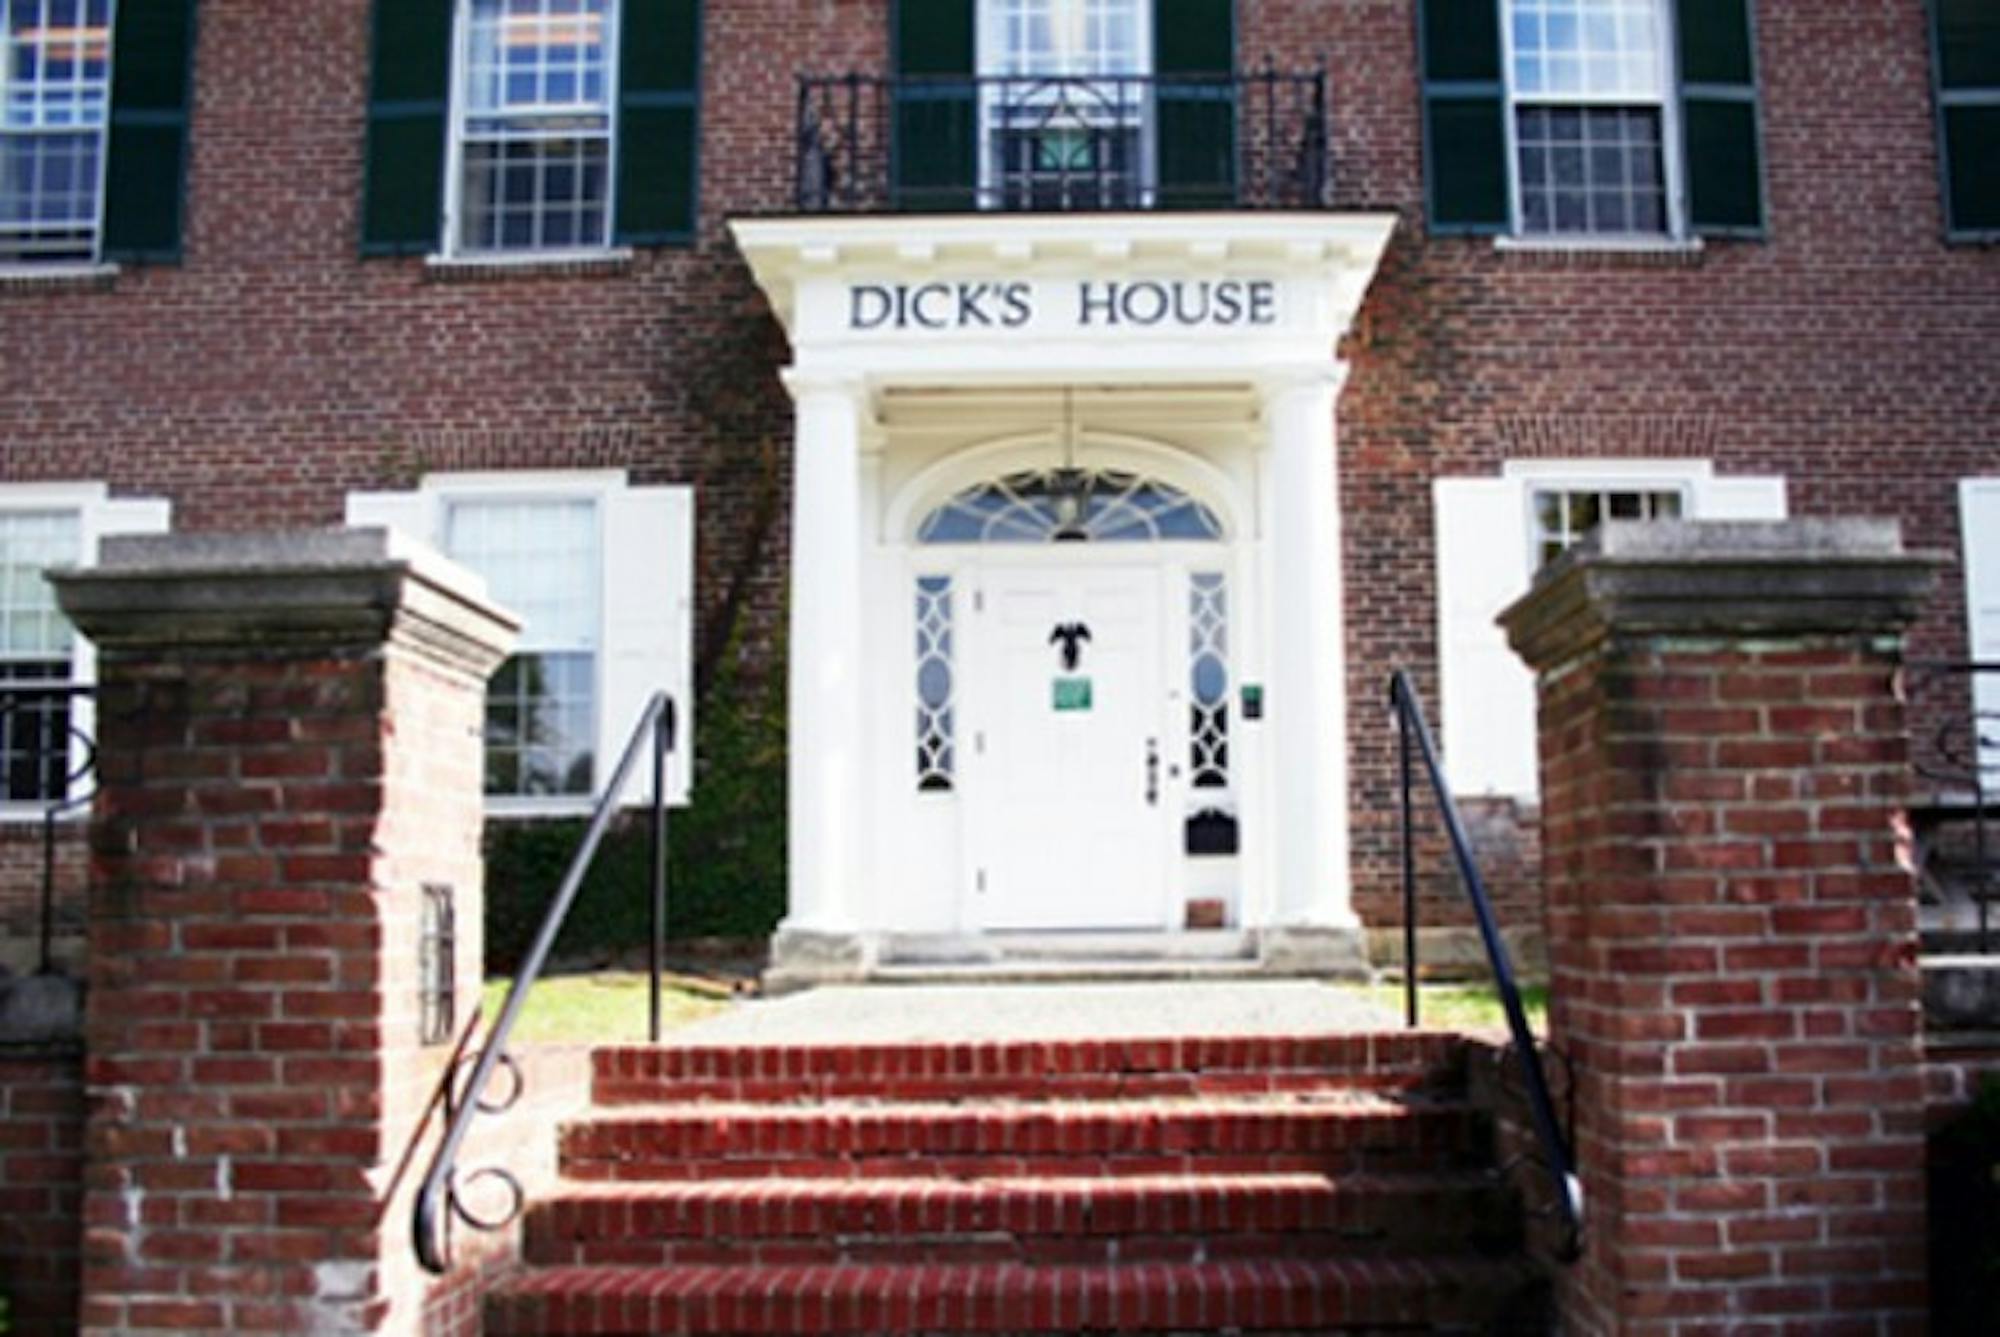 Due to staffing and financial issues, Dick's House is not open on the weekends during the summer. Instead, Students are referred to DHMC.